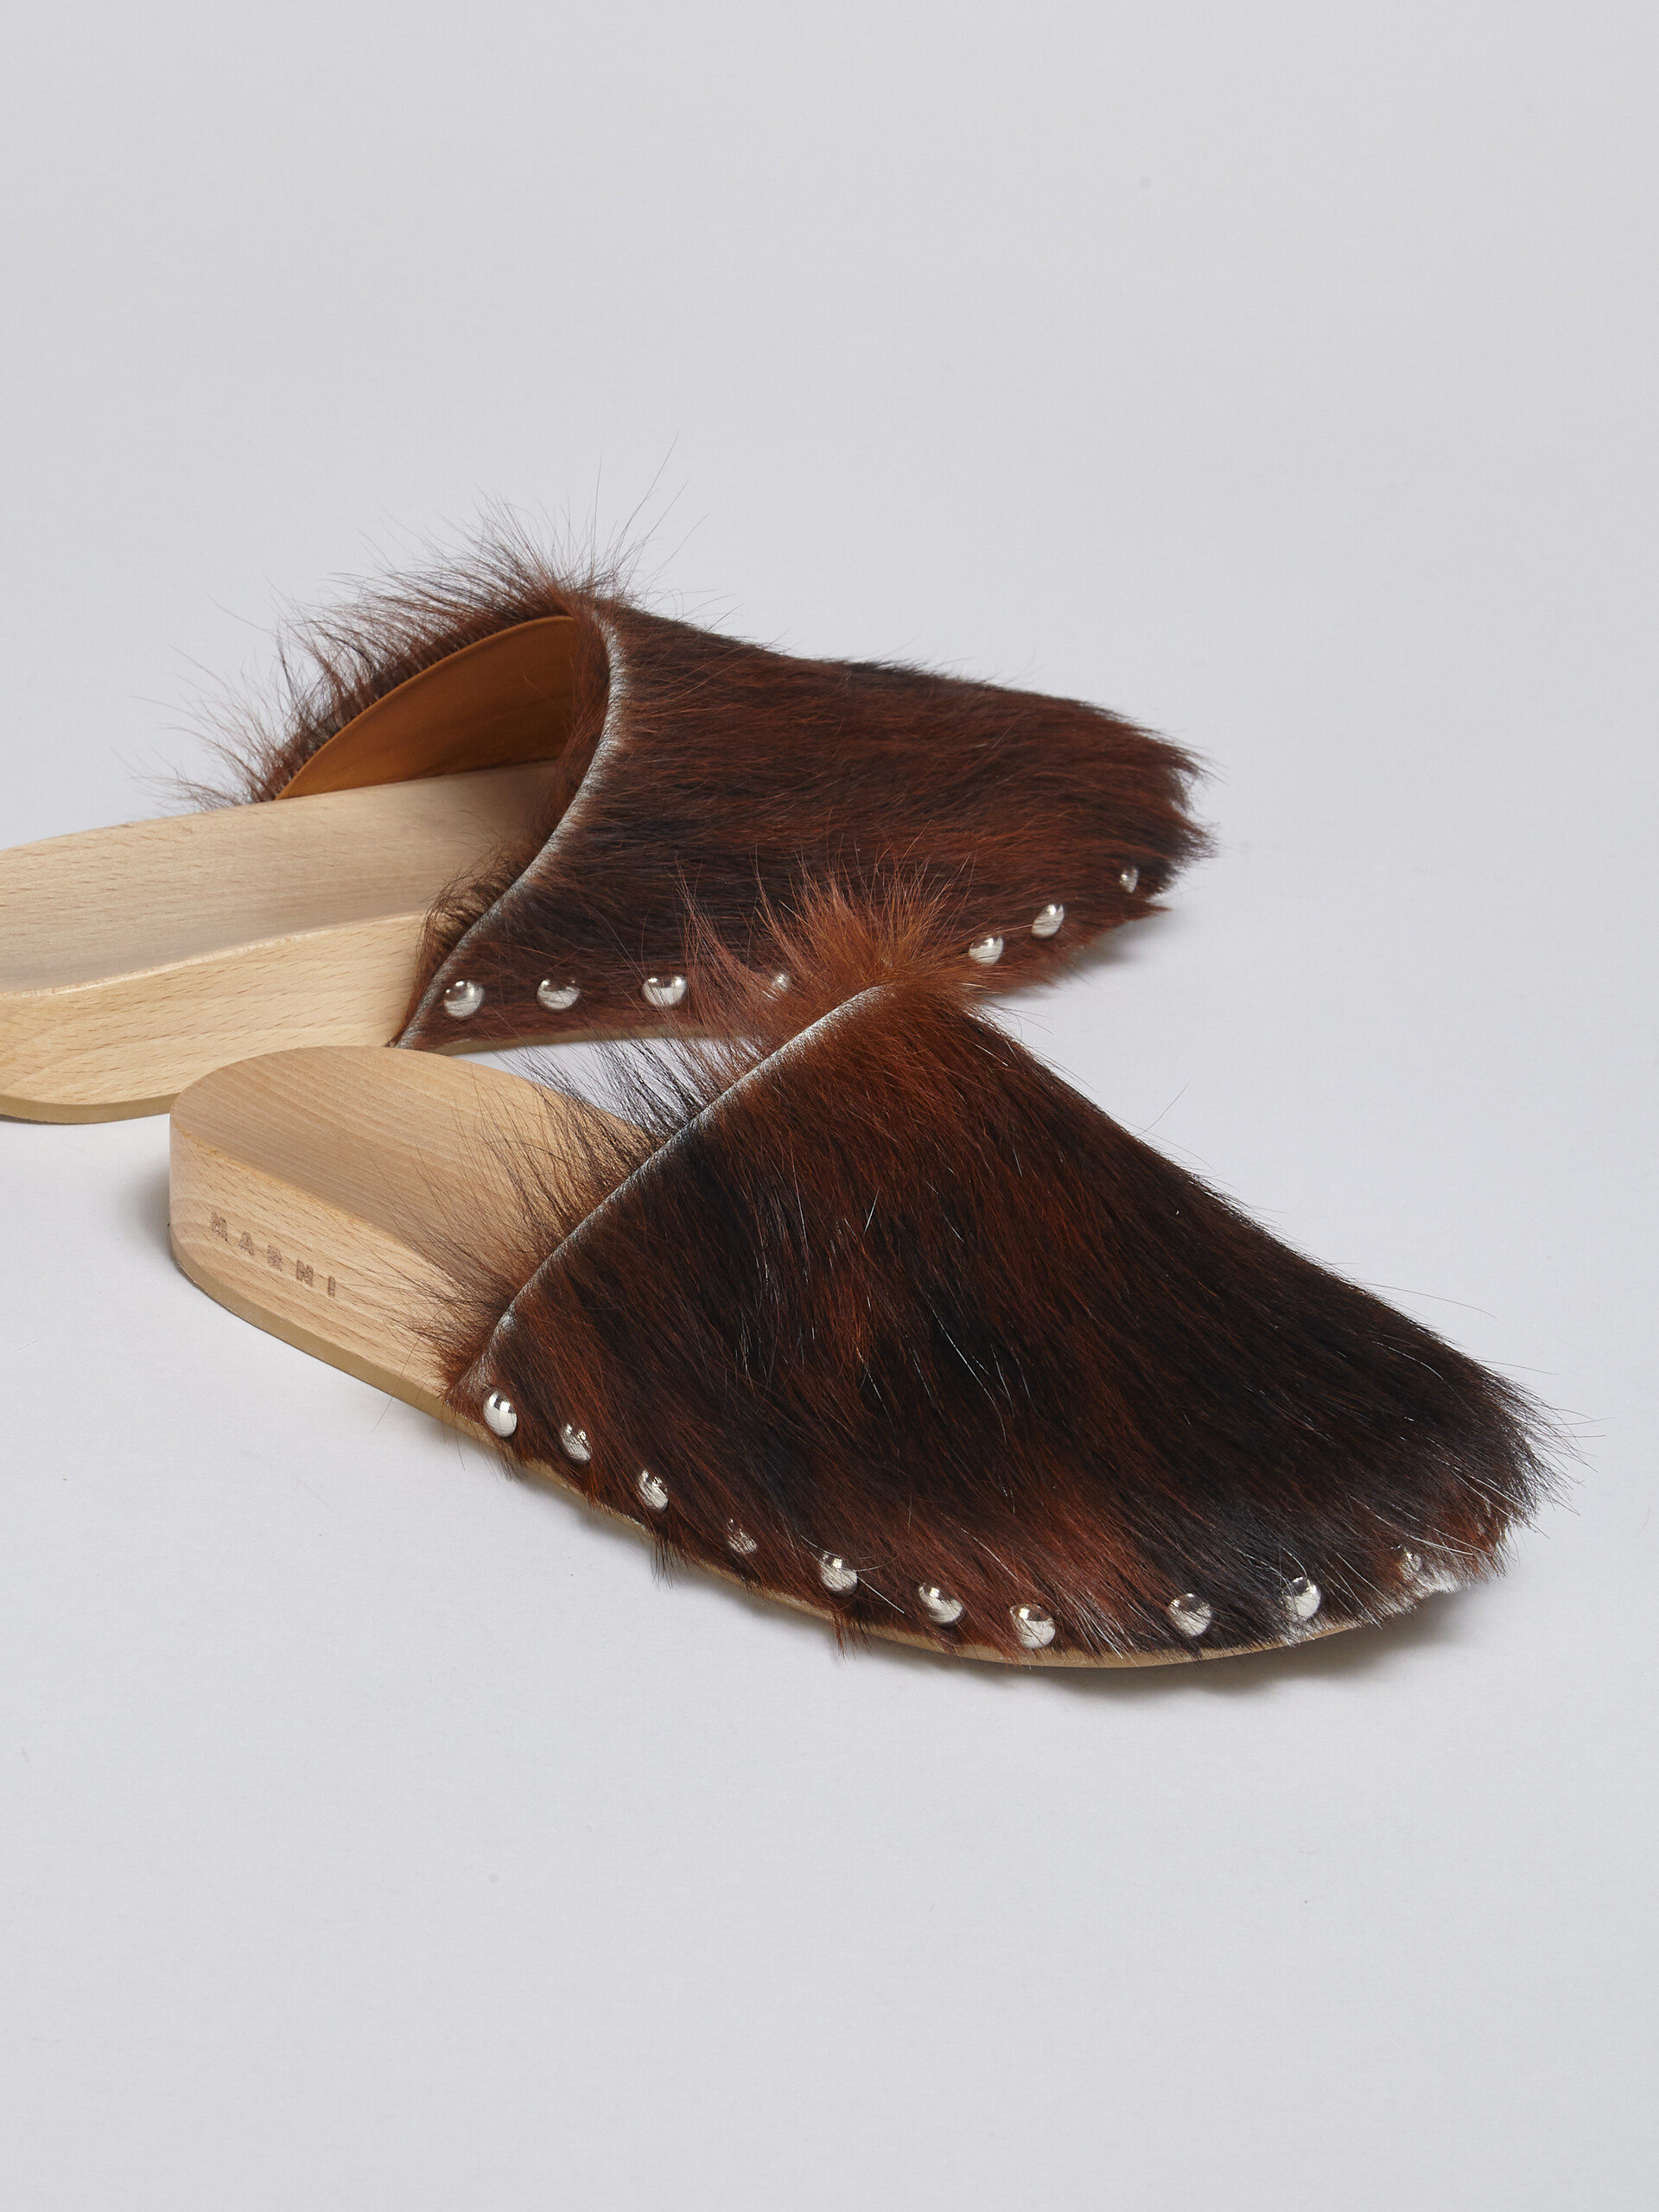 Spotted long calf hair wood sabot - Clogs - Image 5